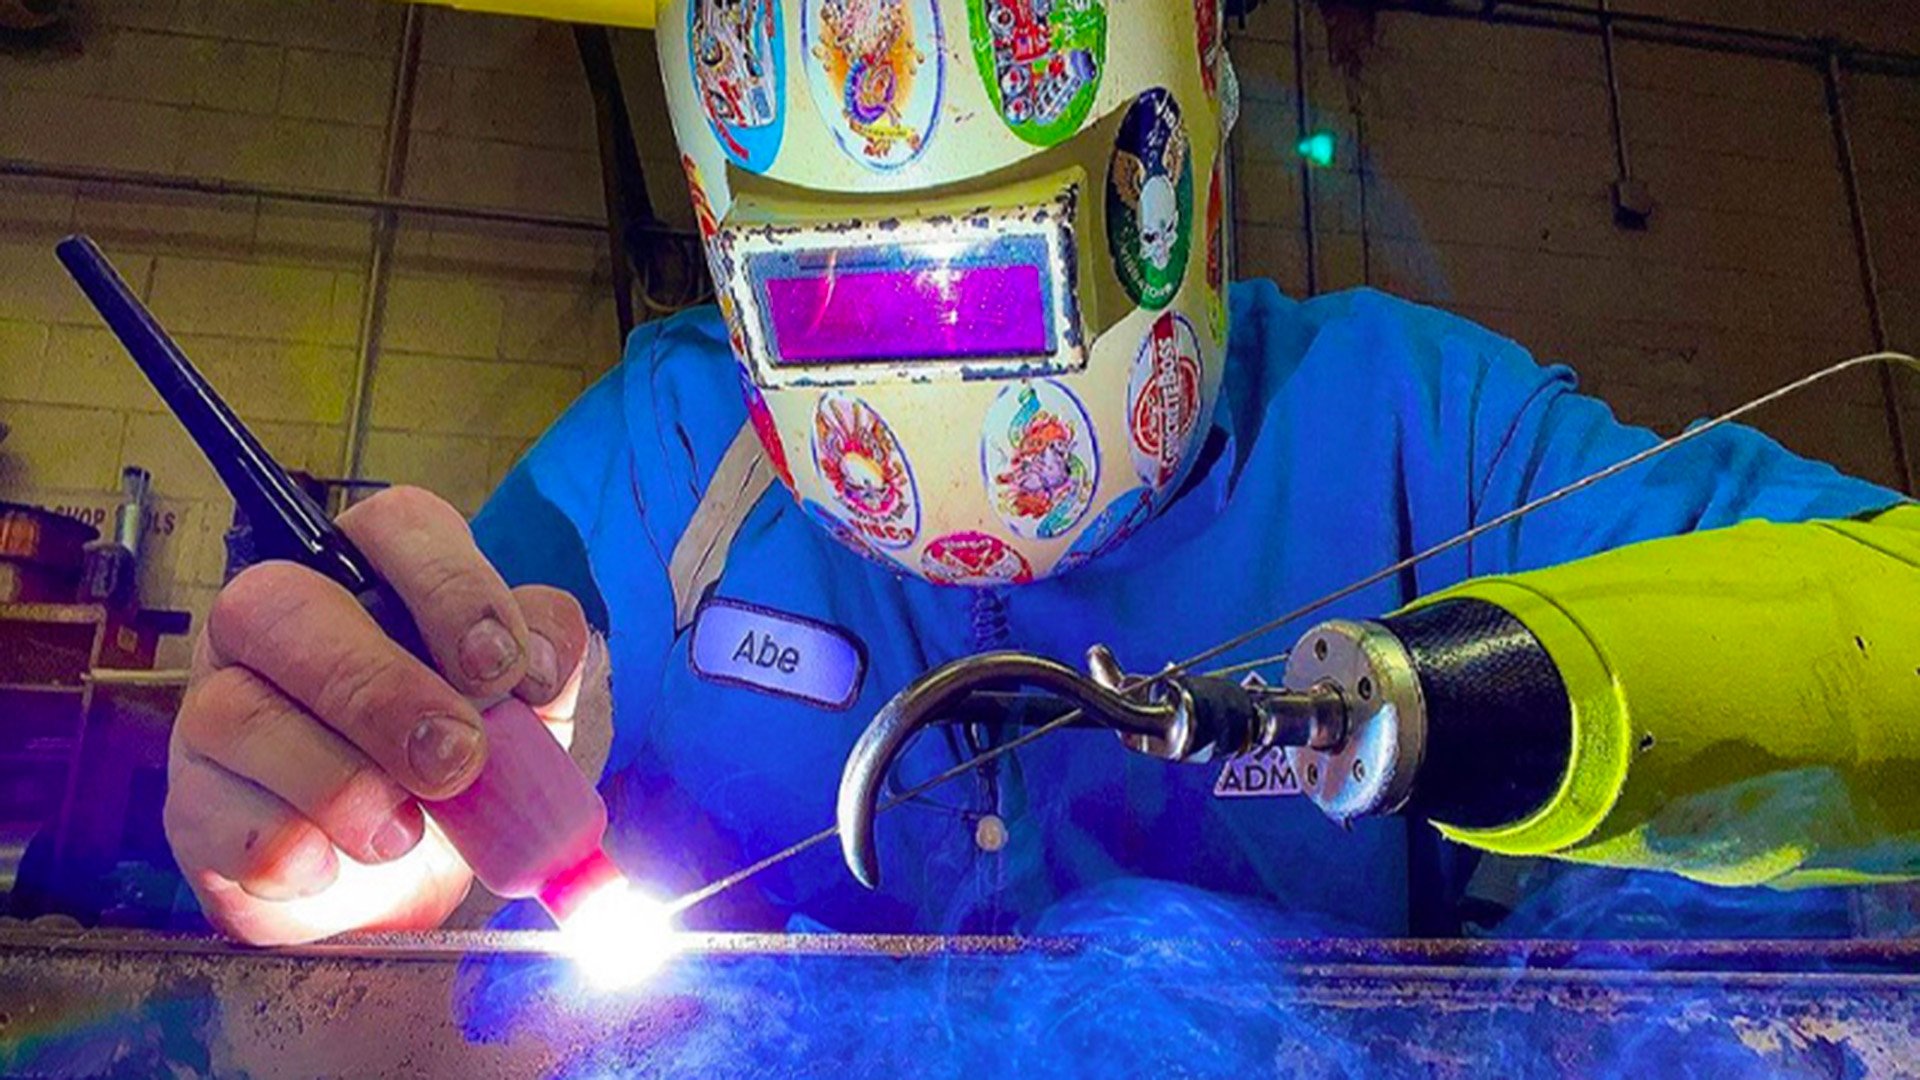 Abe uses a body-powered option for welding.